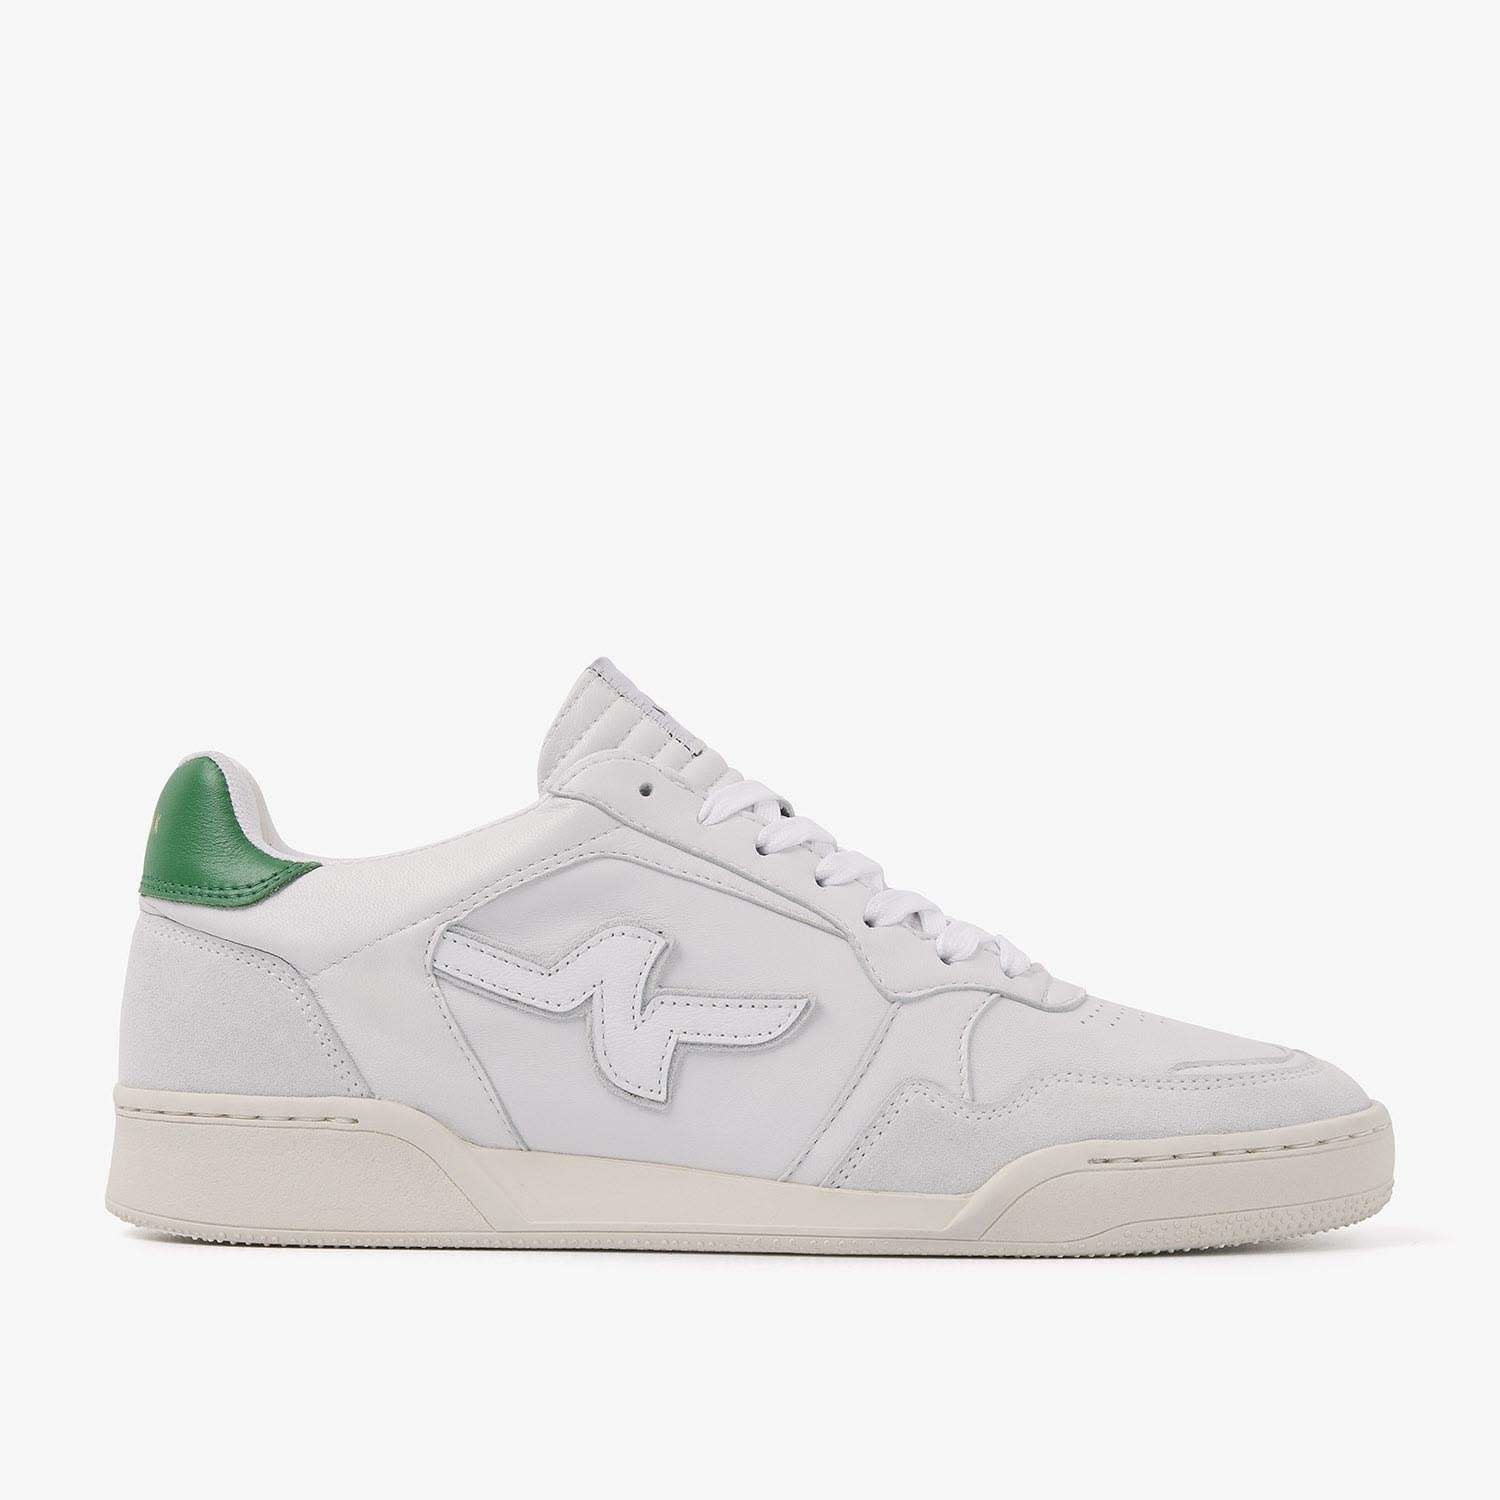 Blueberry pulse white leather green-2